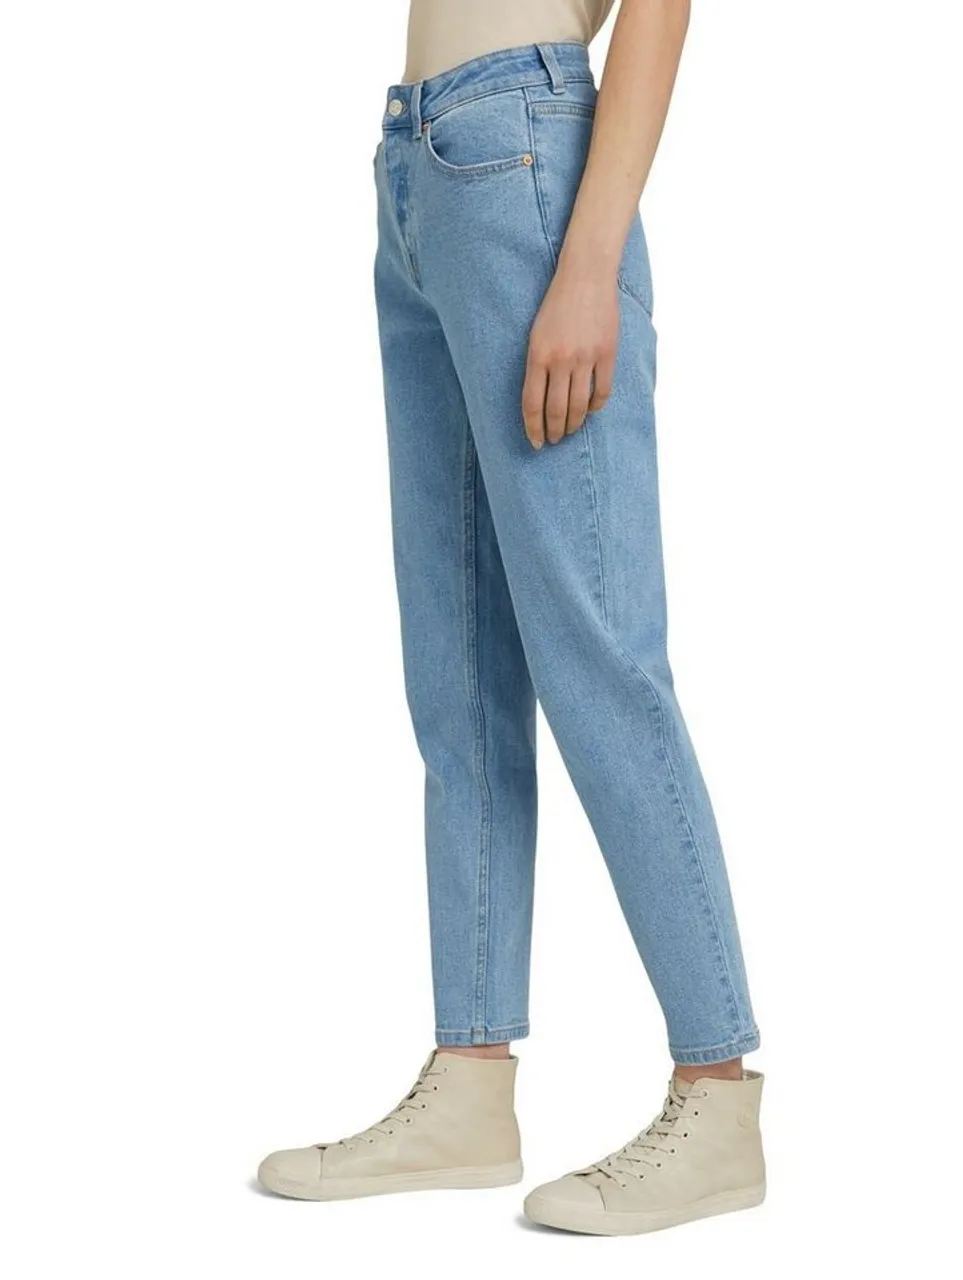 TOM TAILOR Denim Relax-fit-Jeans MOM mit Stretch